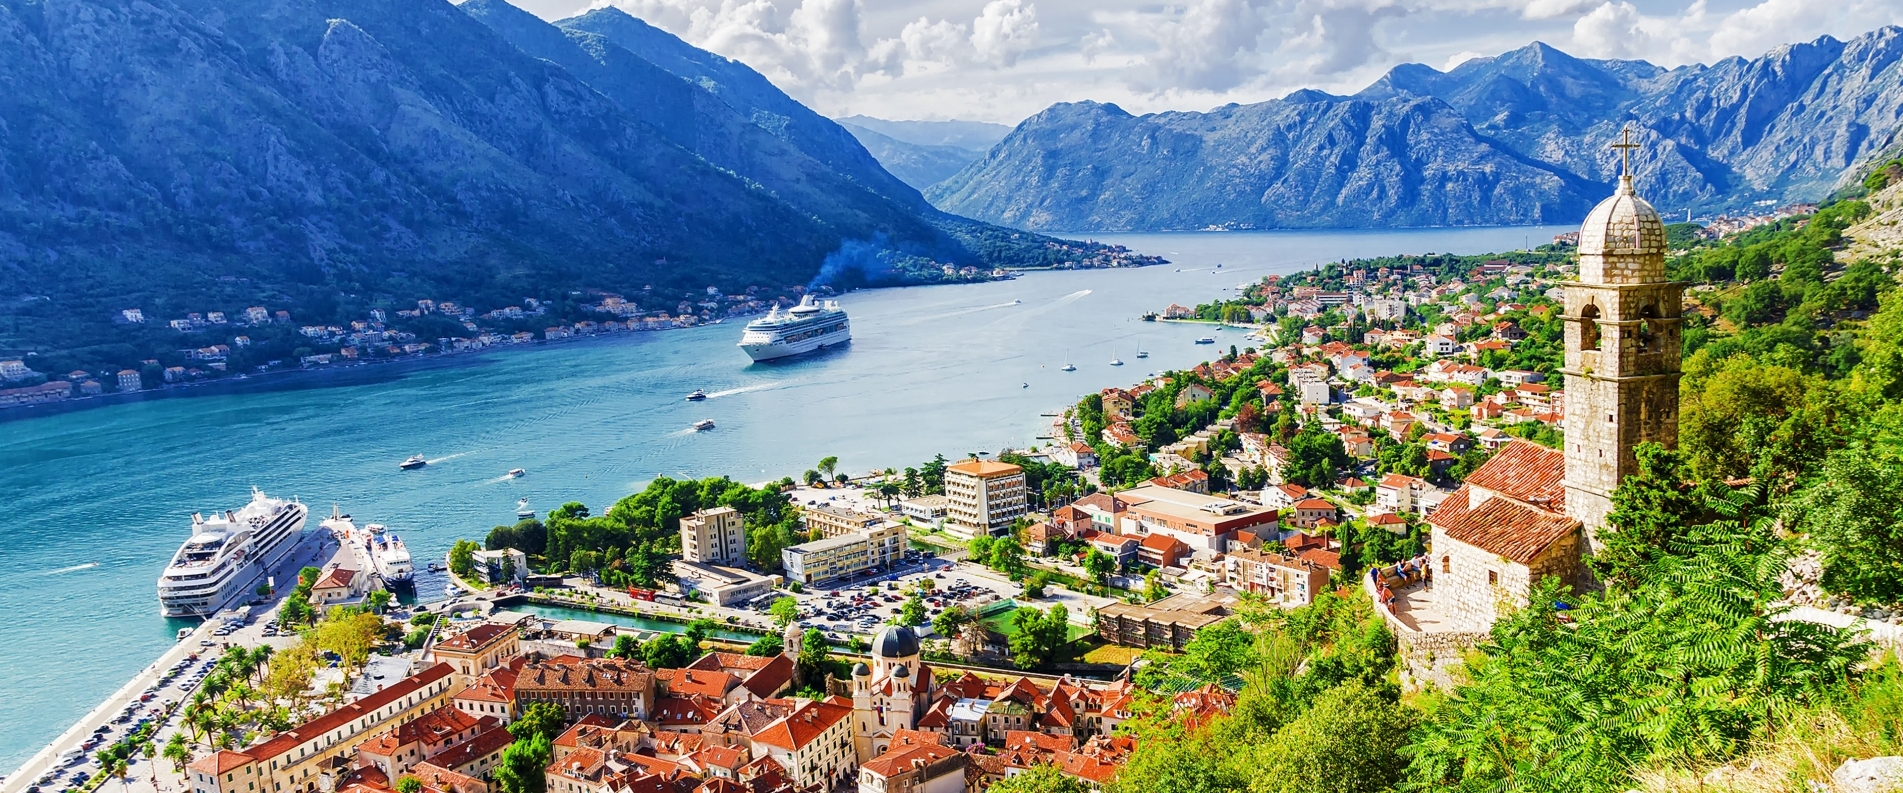 Kotor — a fairy-tale medieval town